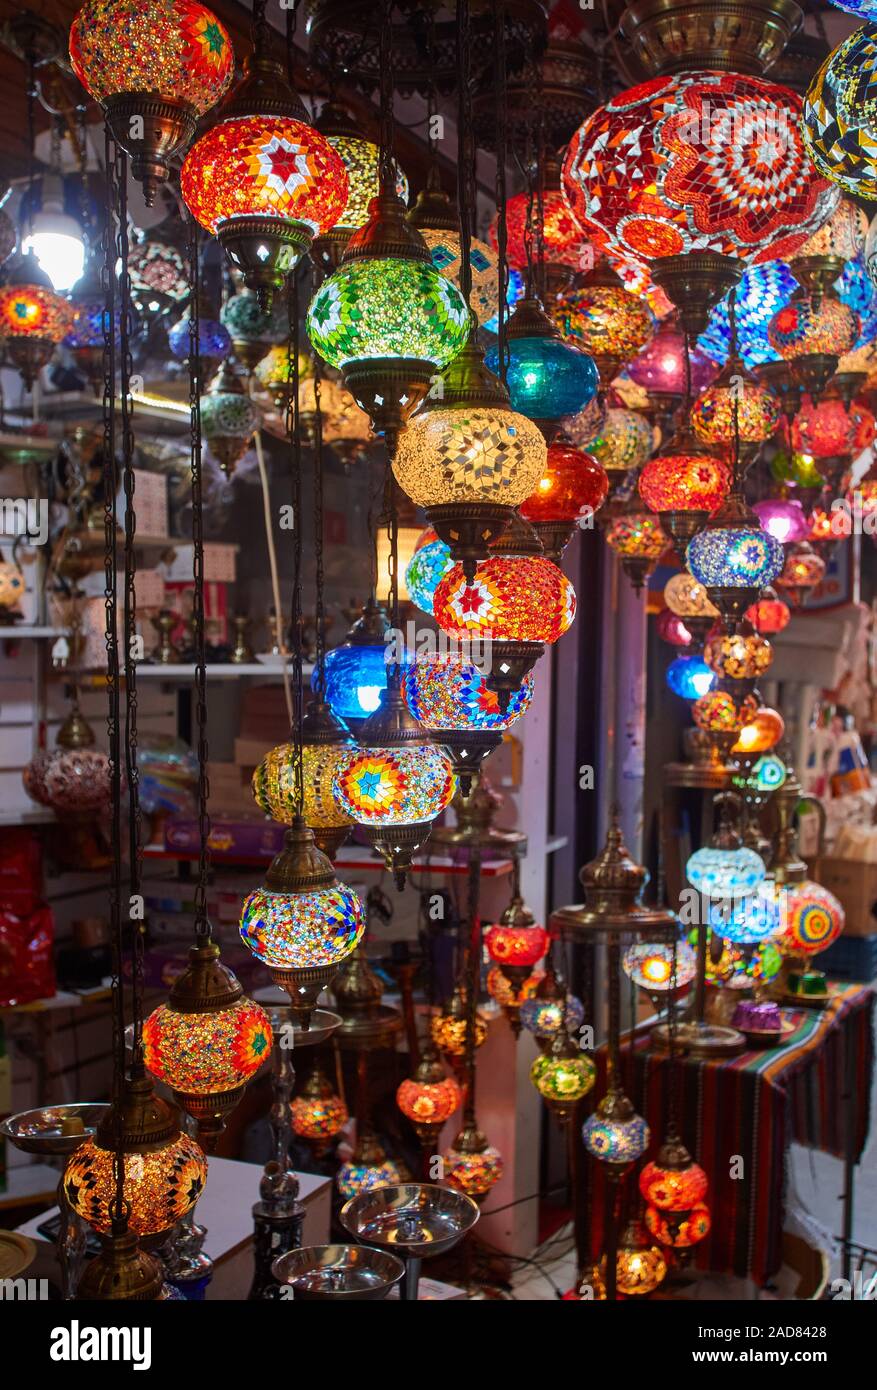 Turkish lamps for sale in the Grand Bazaar, Istanbul, Turkey Stock Photo -  Alamy